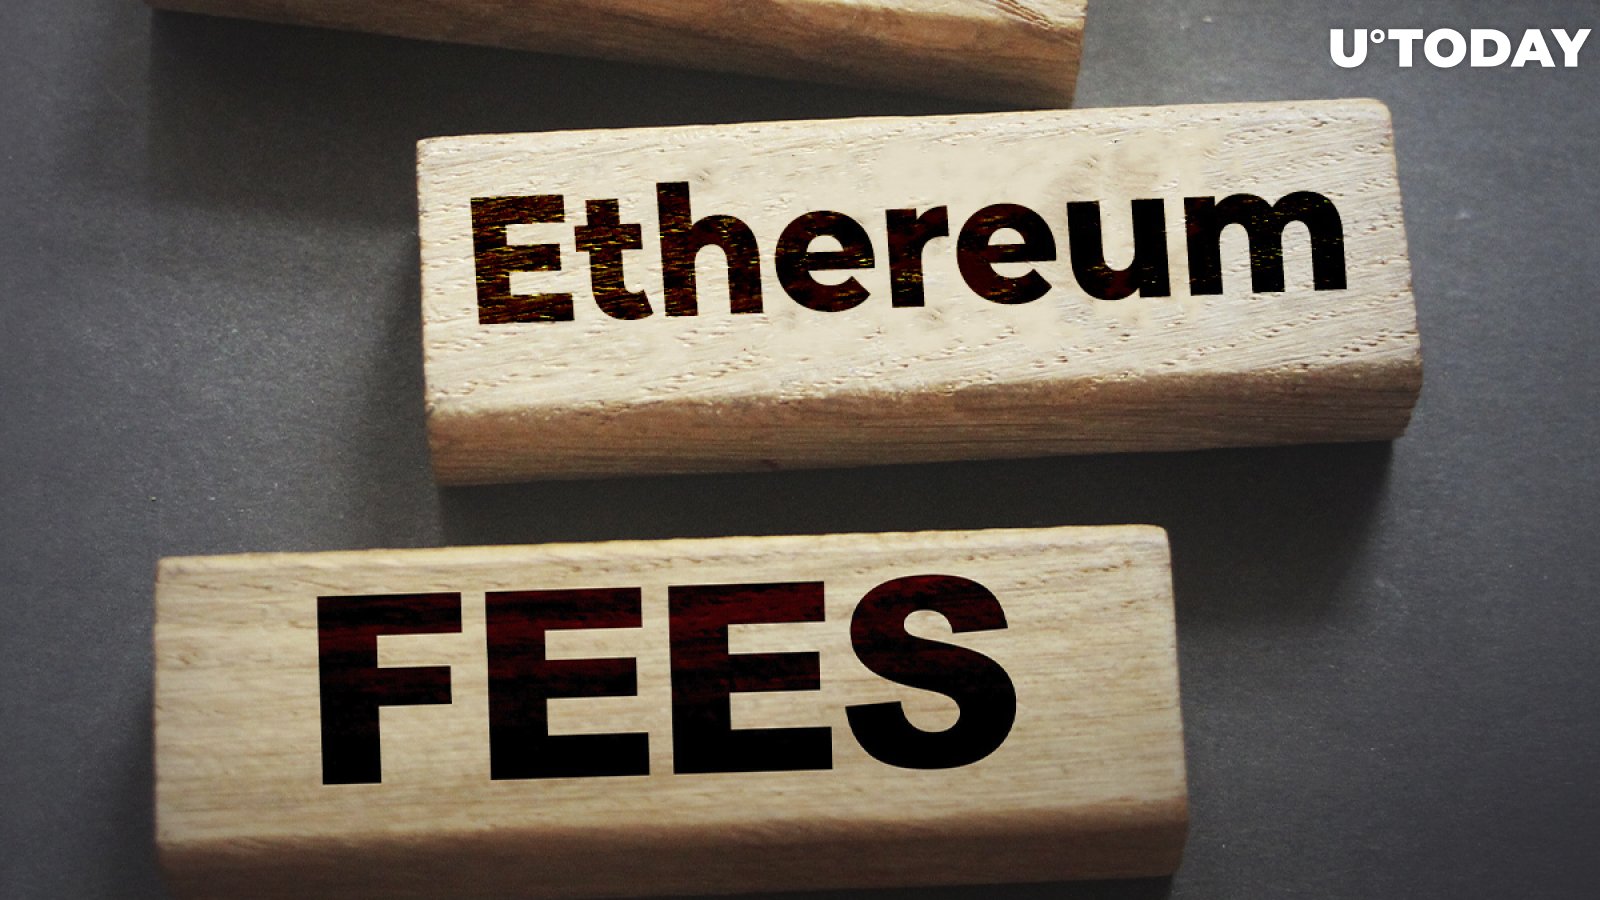 Ethereum Fees Just Hit New All-Time High